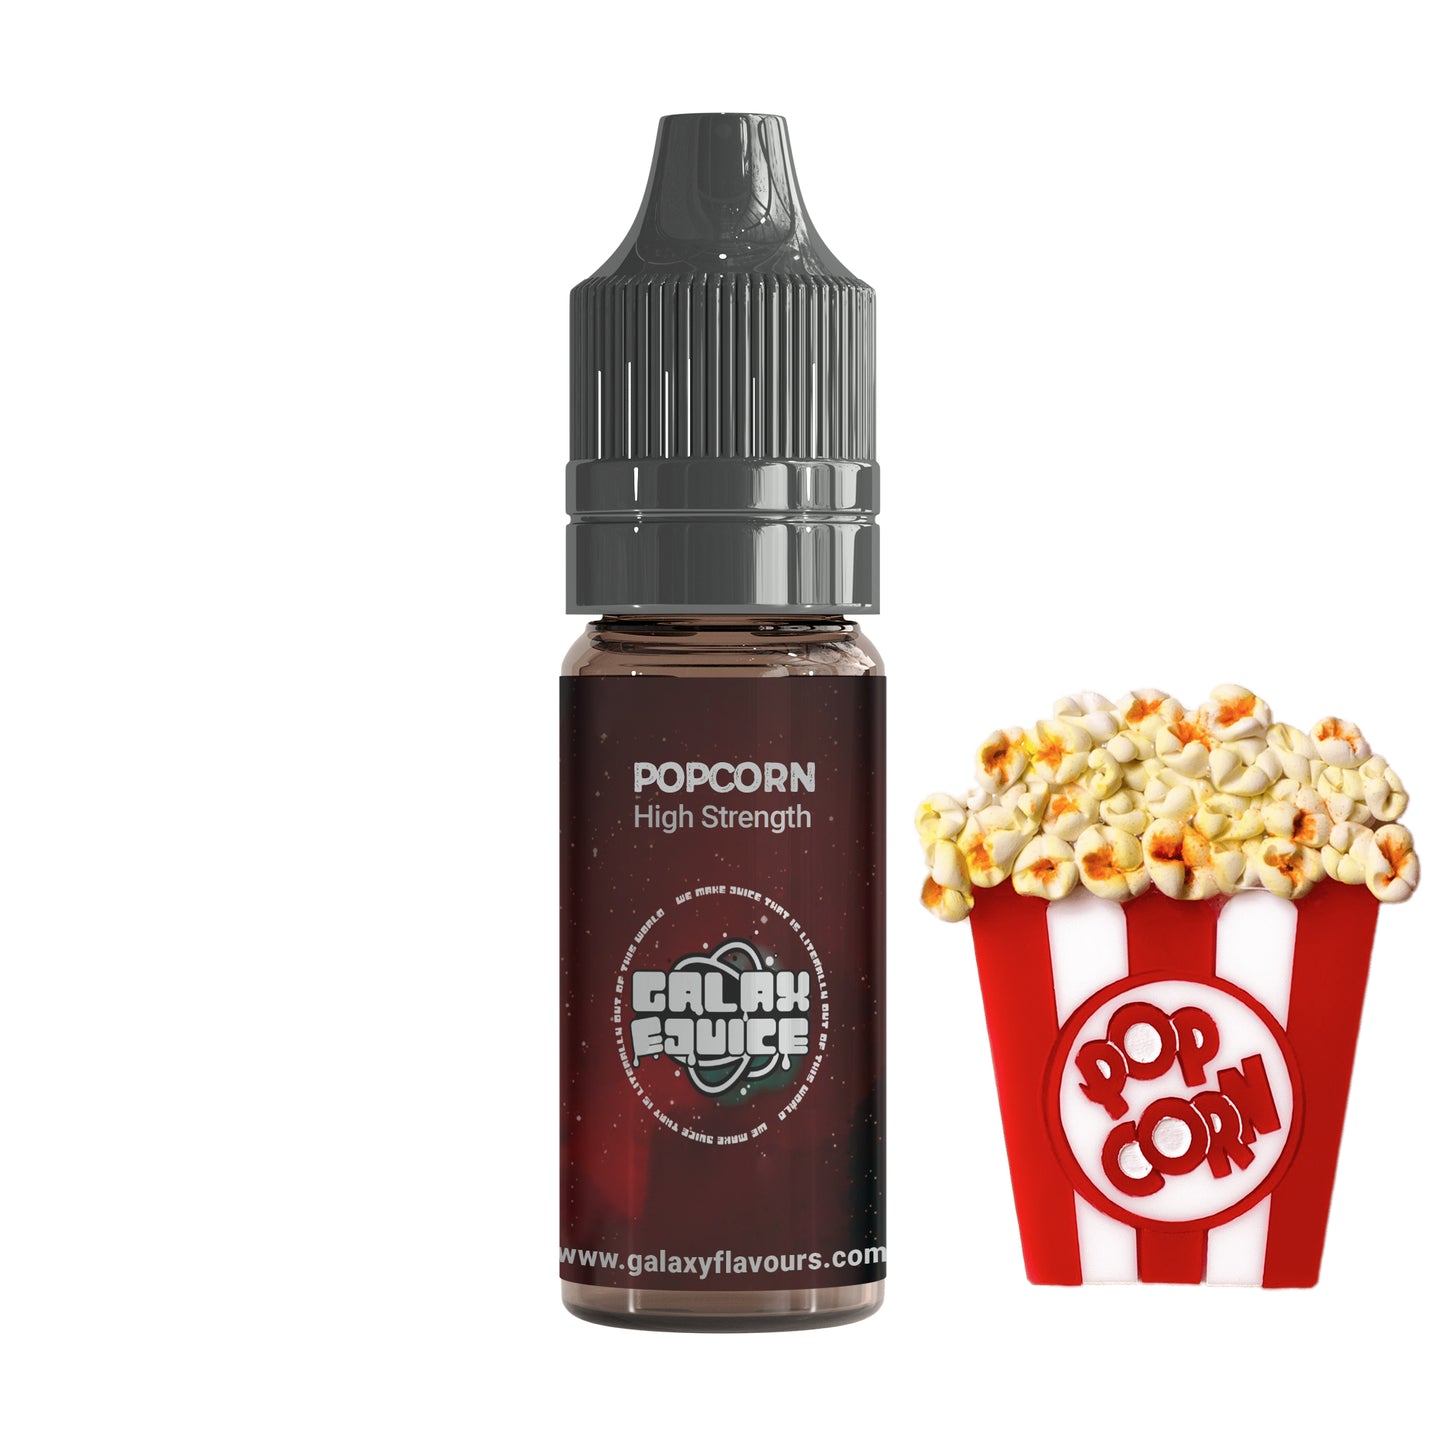 Popcorn High Strength Professional Flavouring.